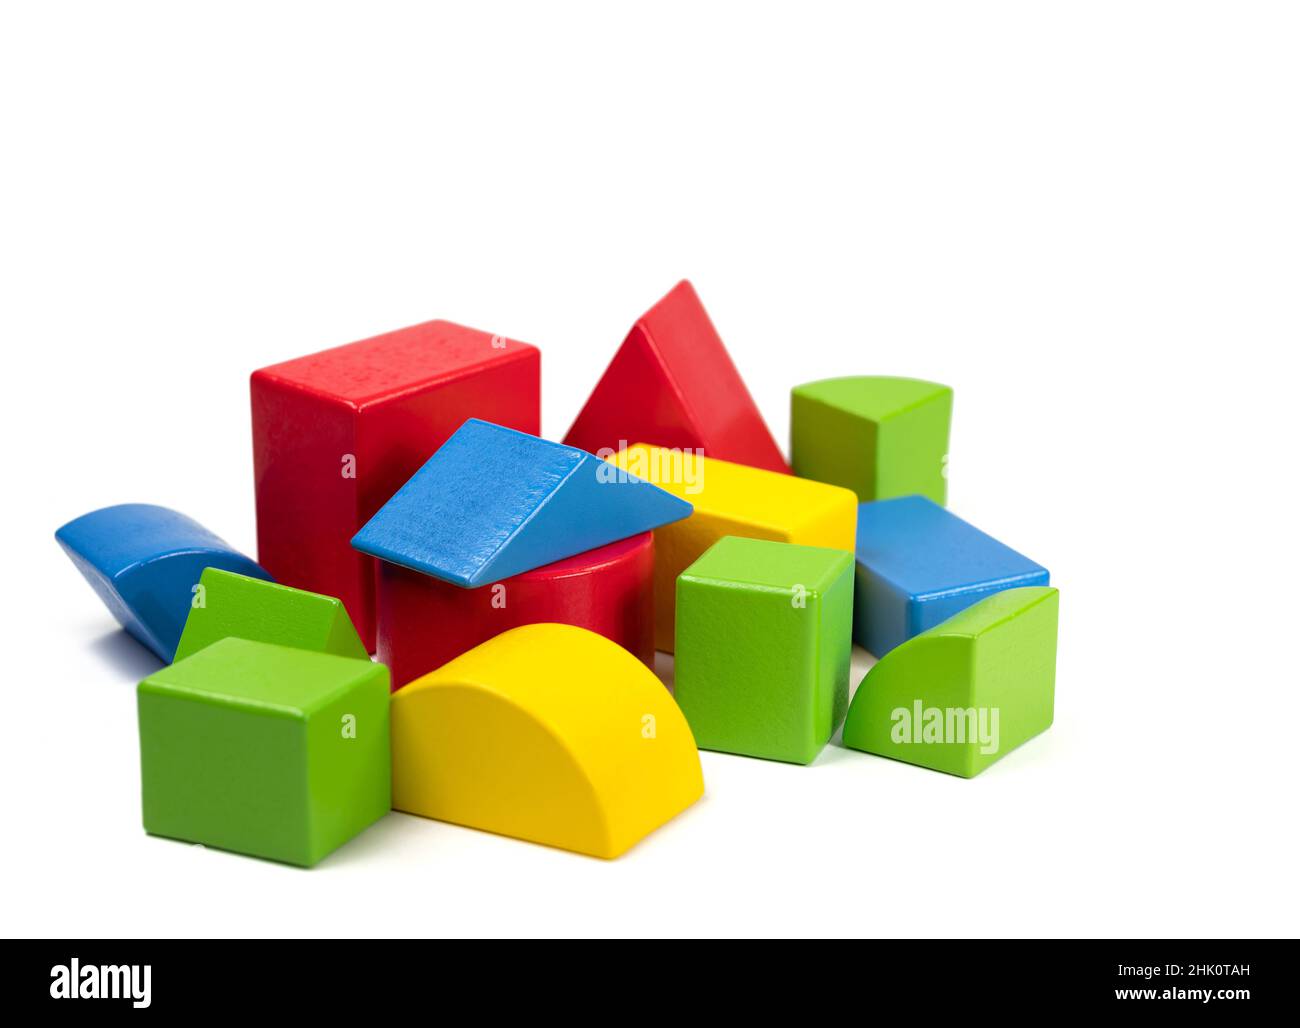 Wooden building blocks of different shapes and colors against a white background Stock Photo